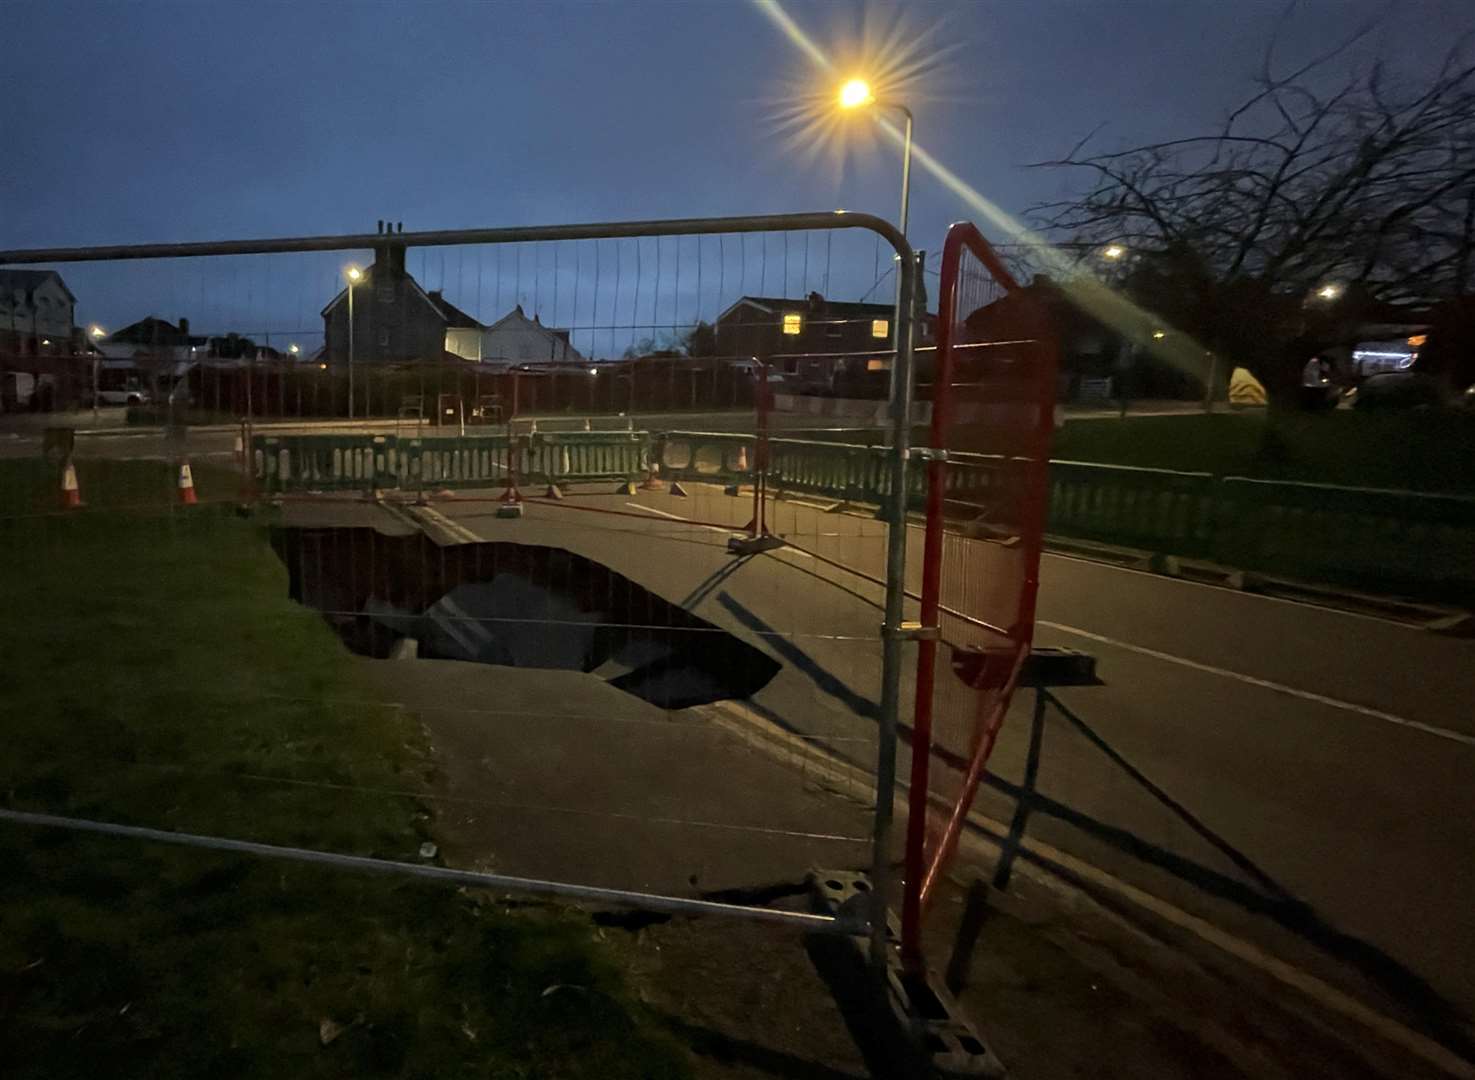 The sinkhole has now been fenced off